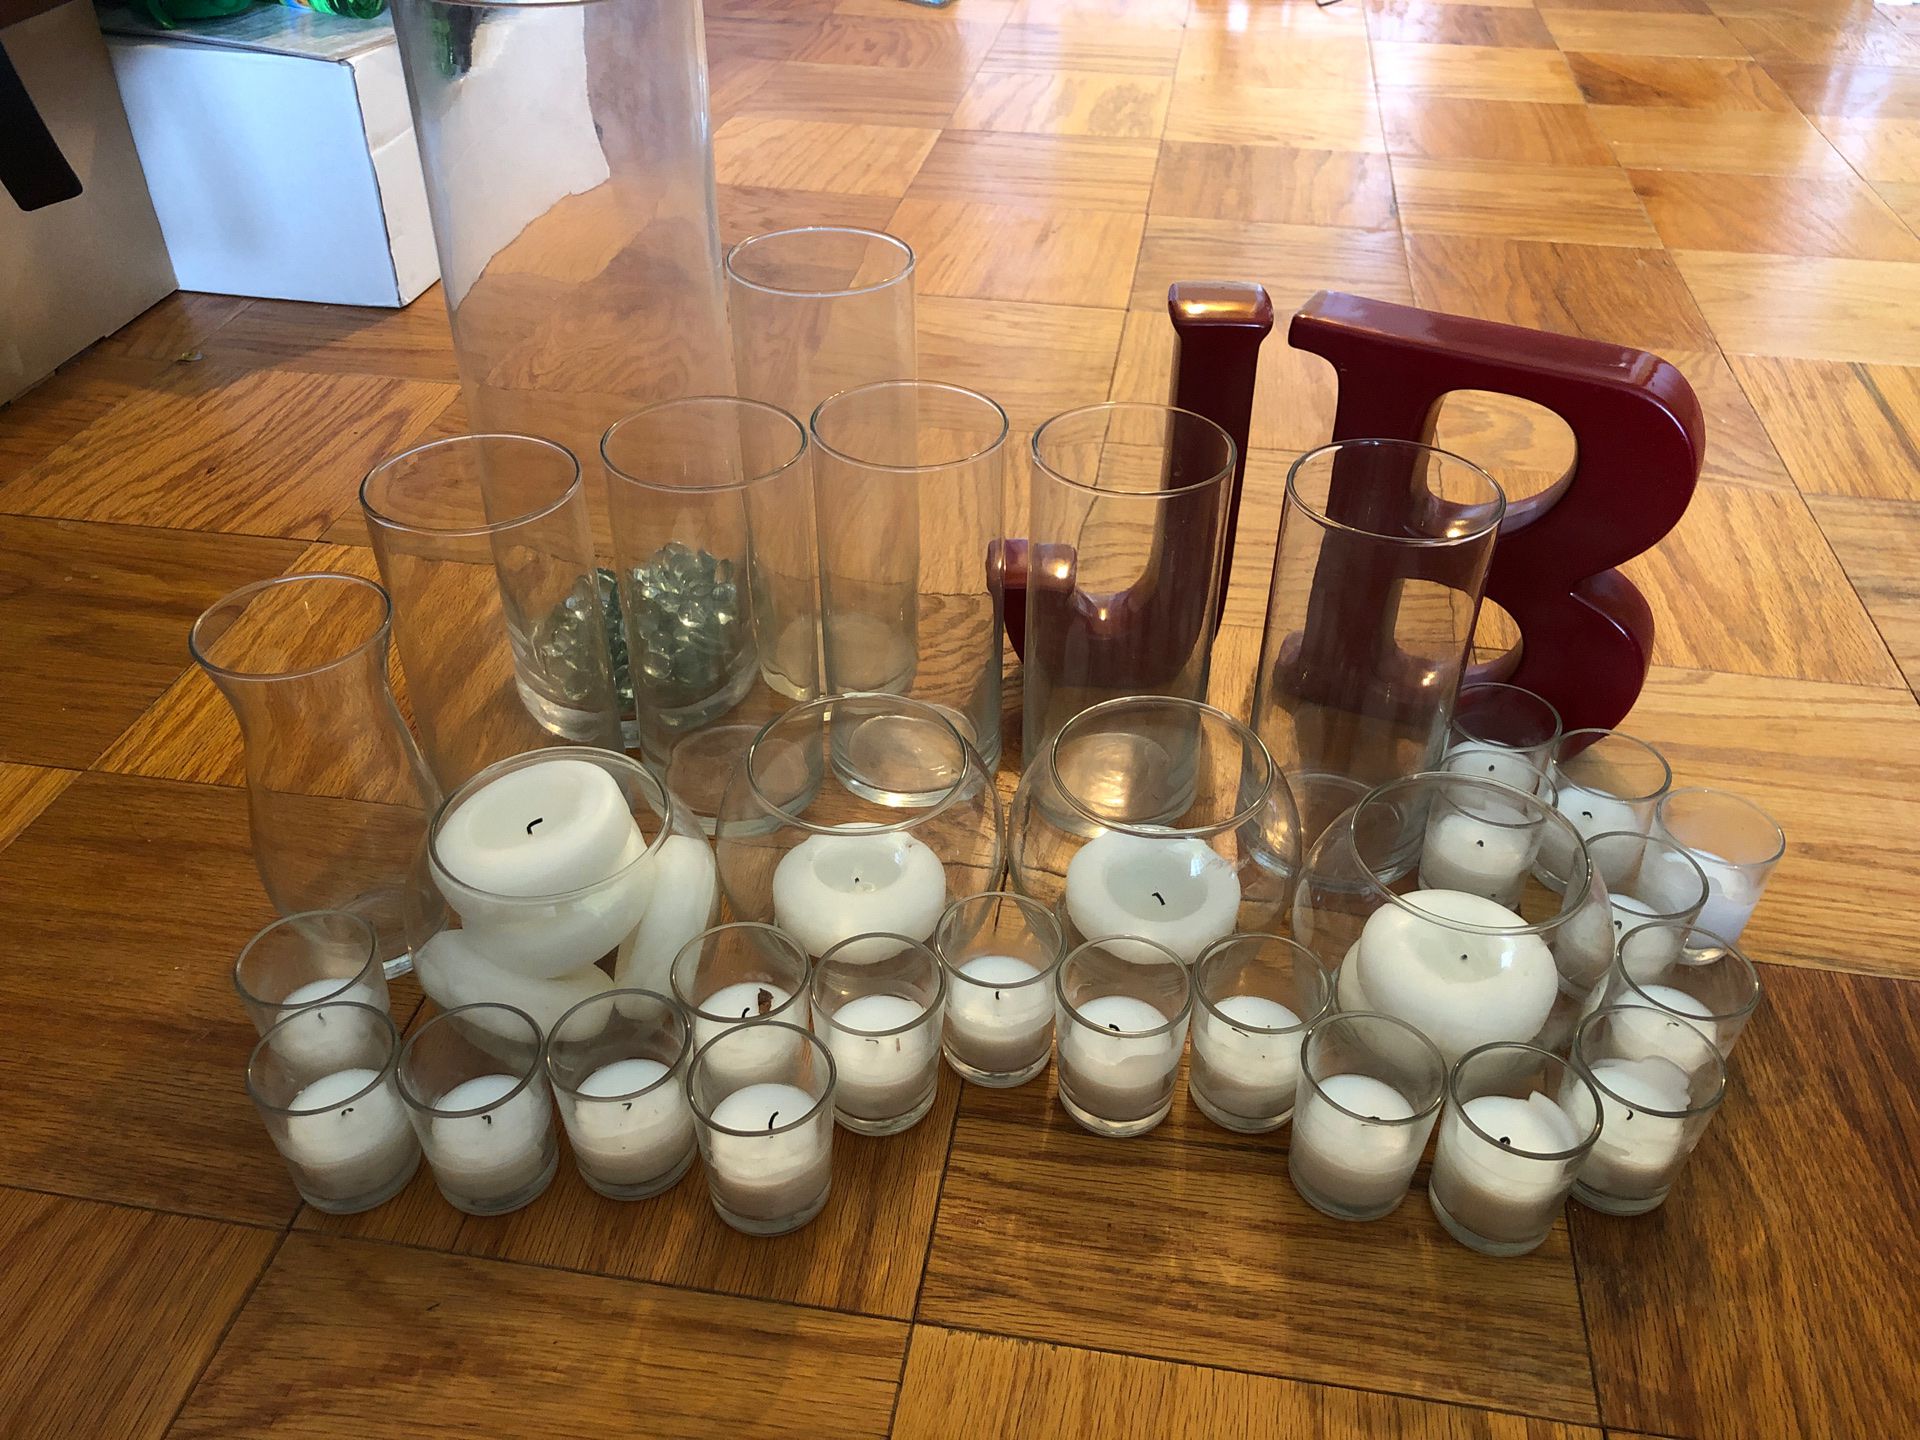 Vases round, votive, tall, and flower weights, candles, and letters